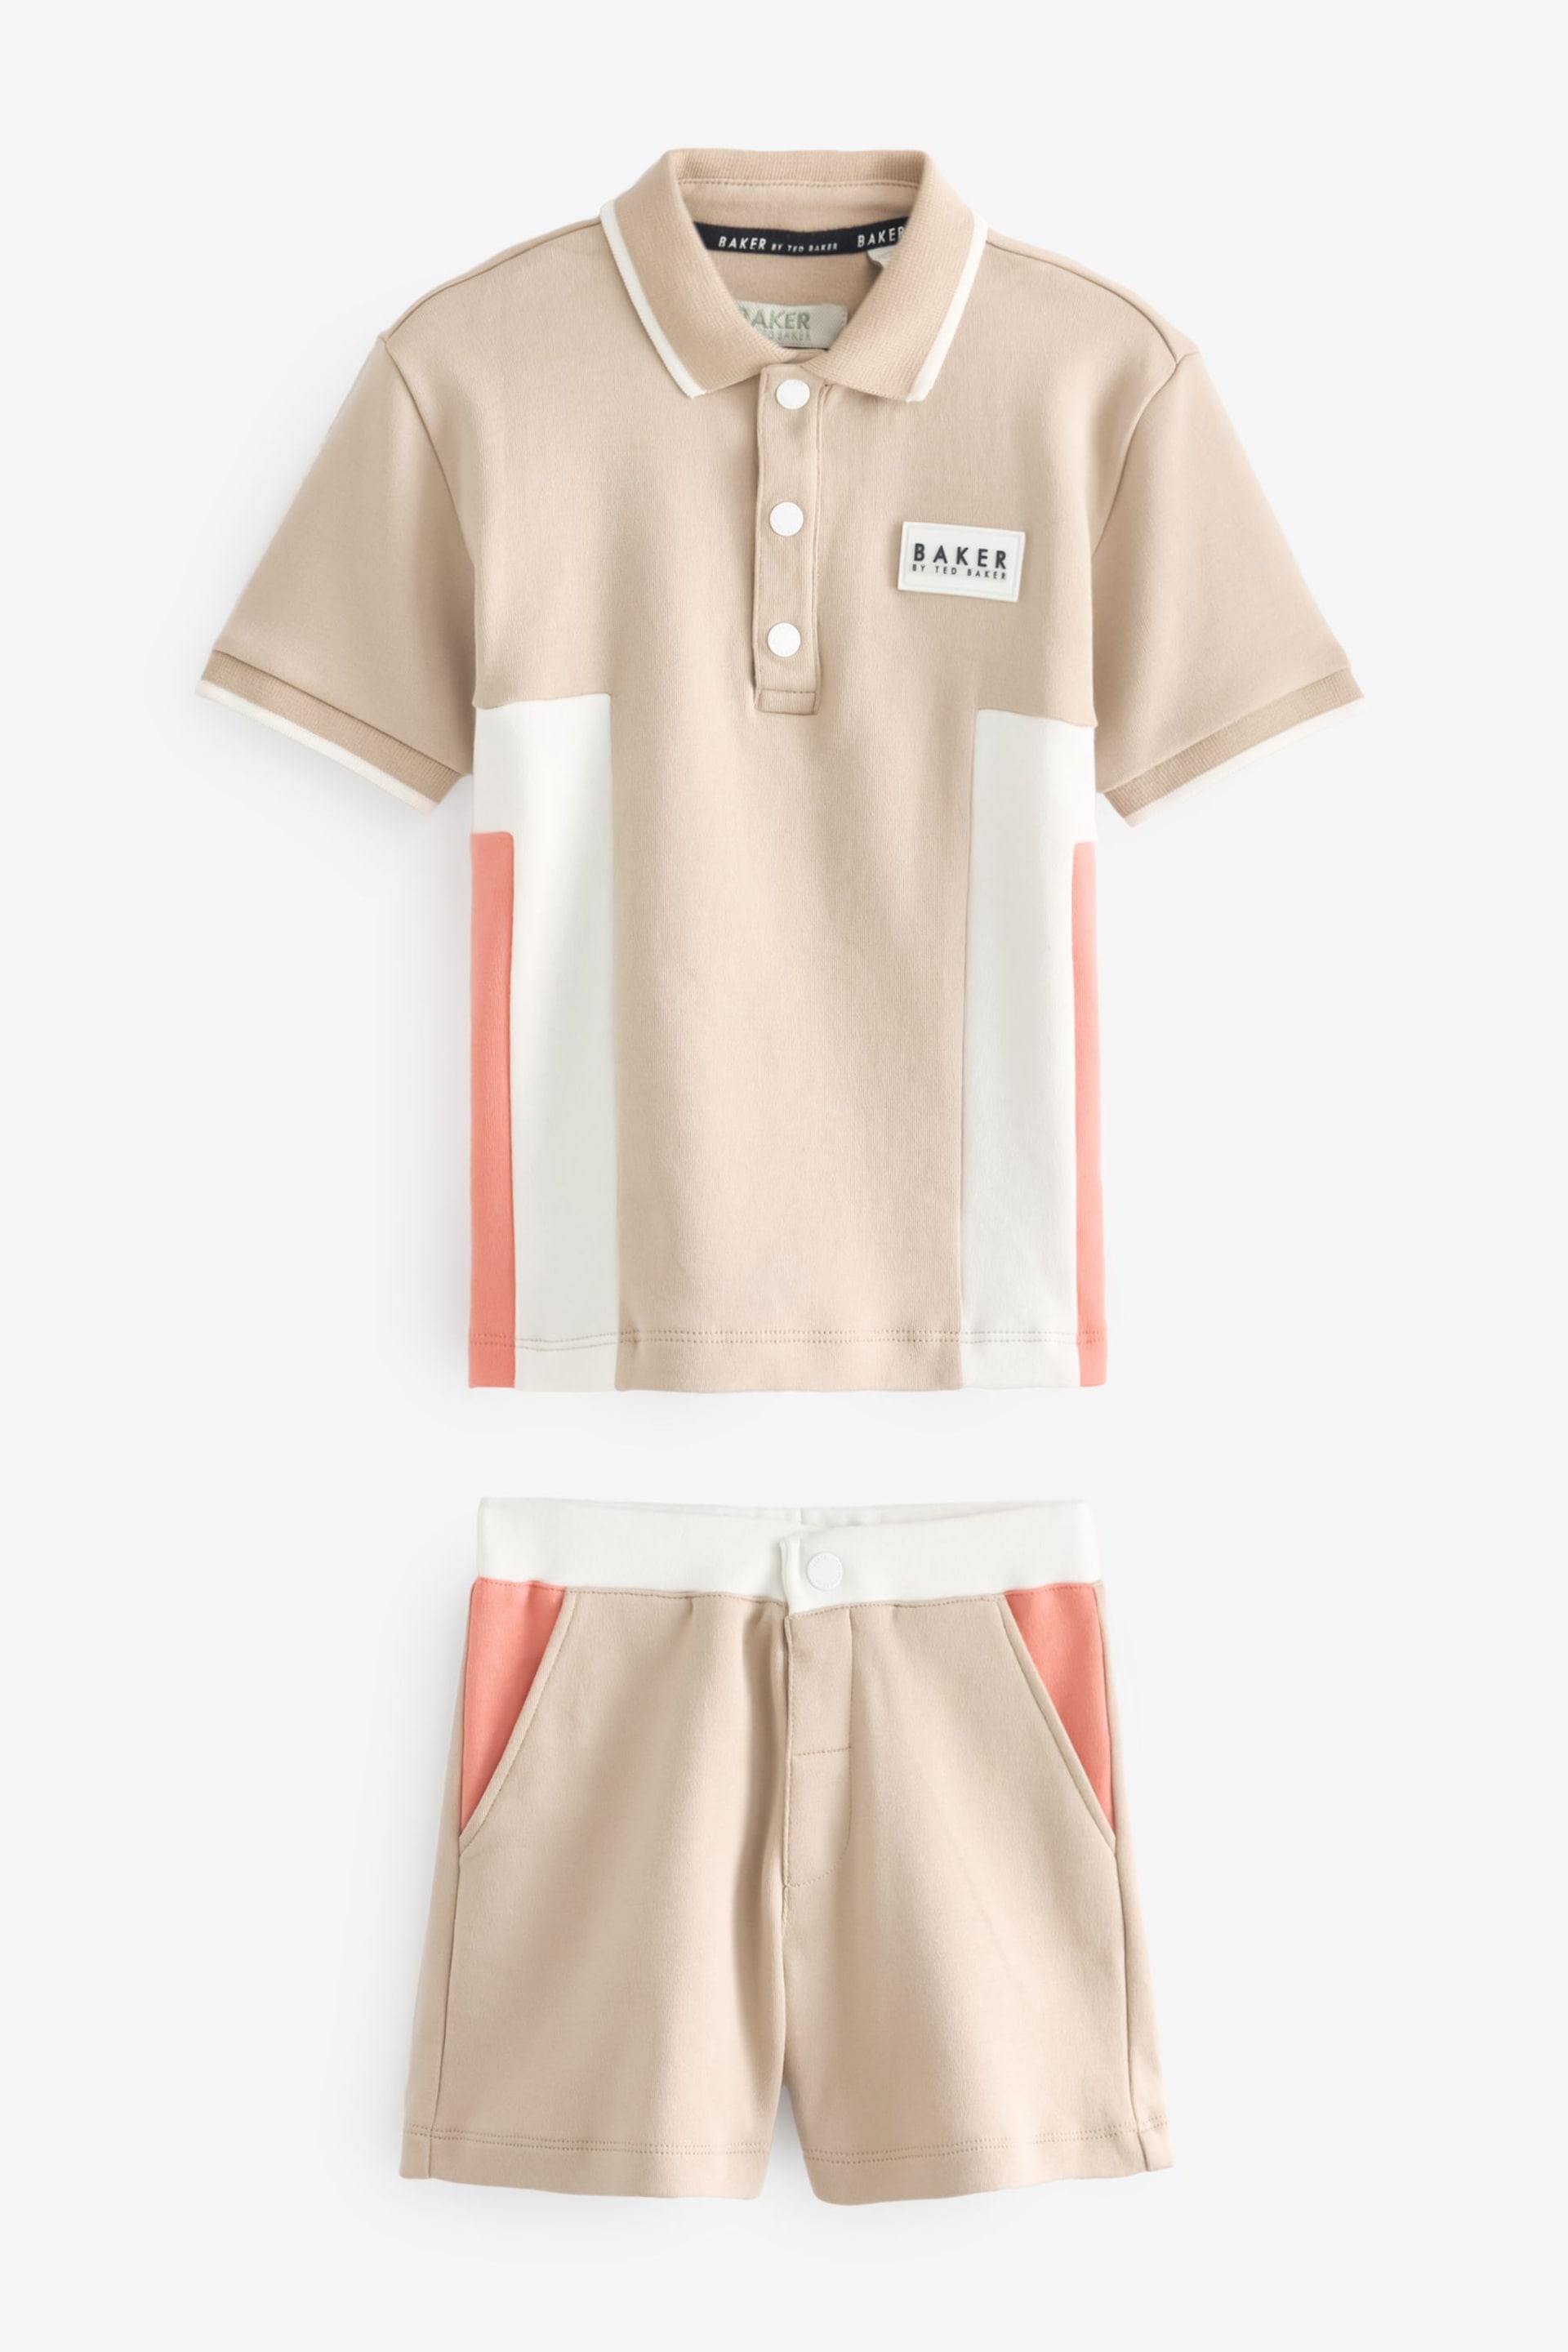 Baker by Ted Baker Colourblock Polo Shirt and Short Set - Image 8 of 11